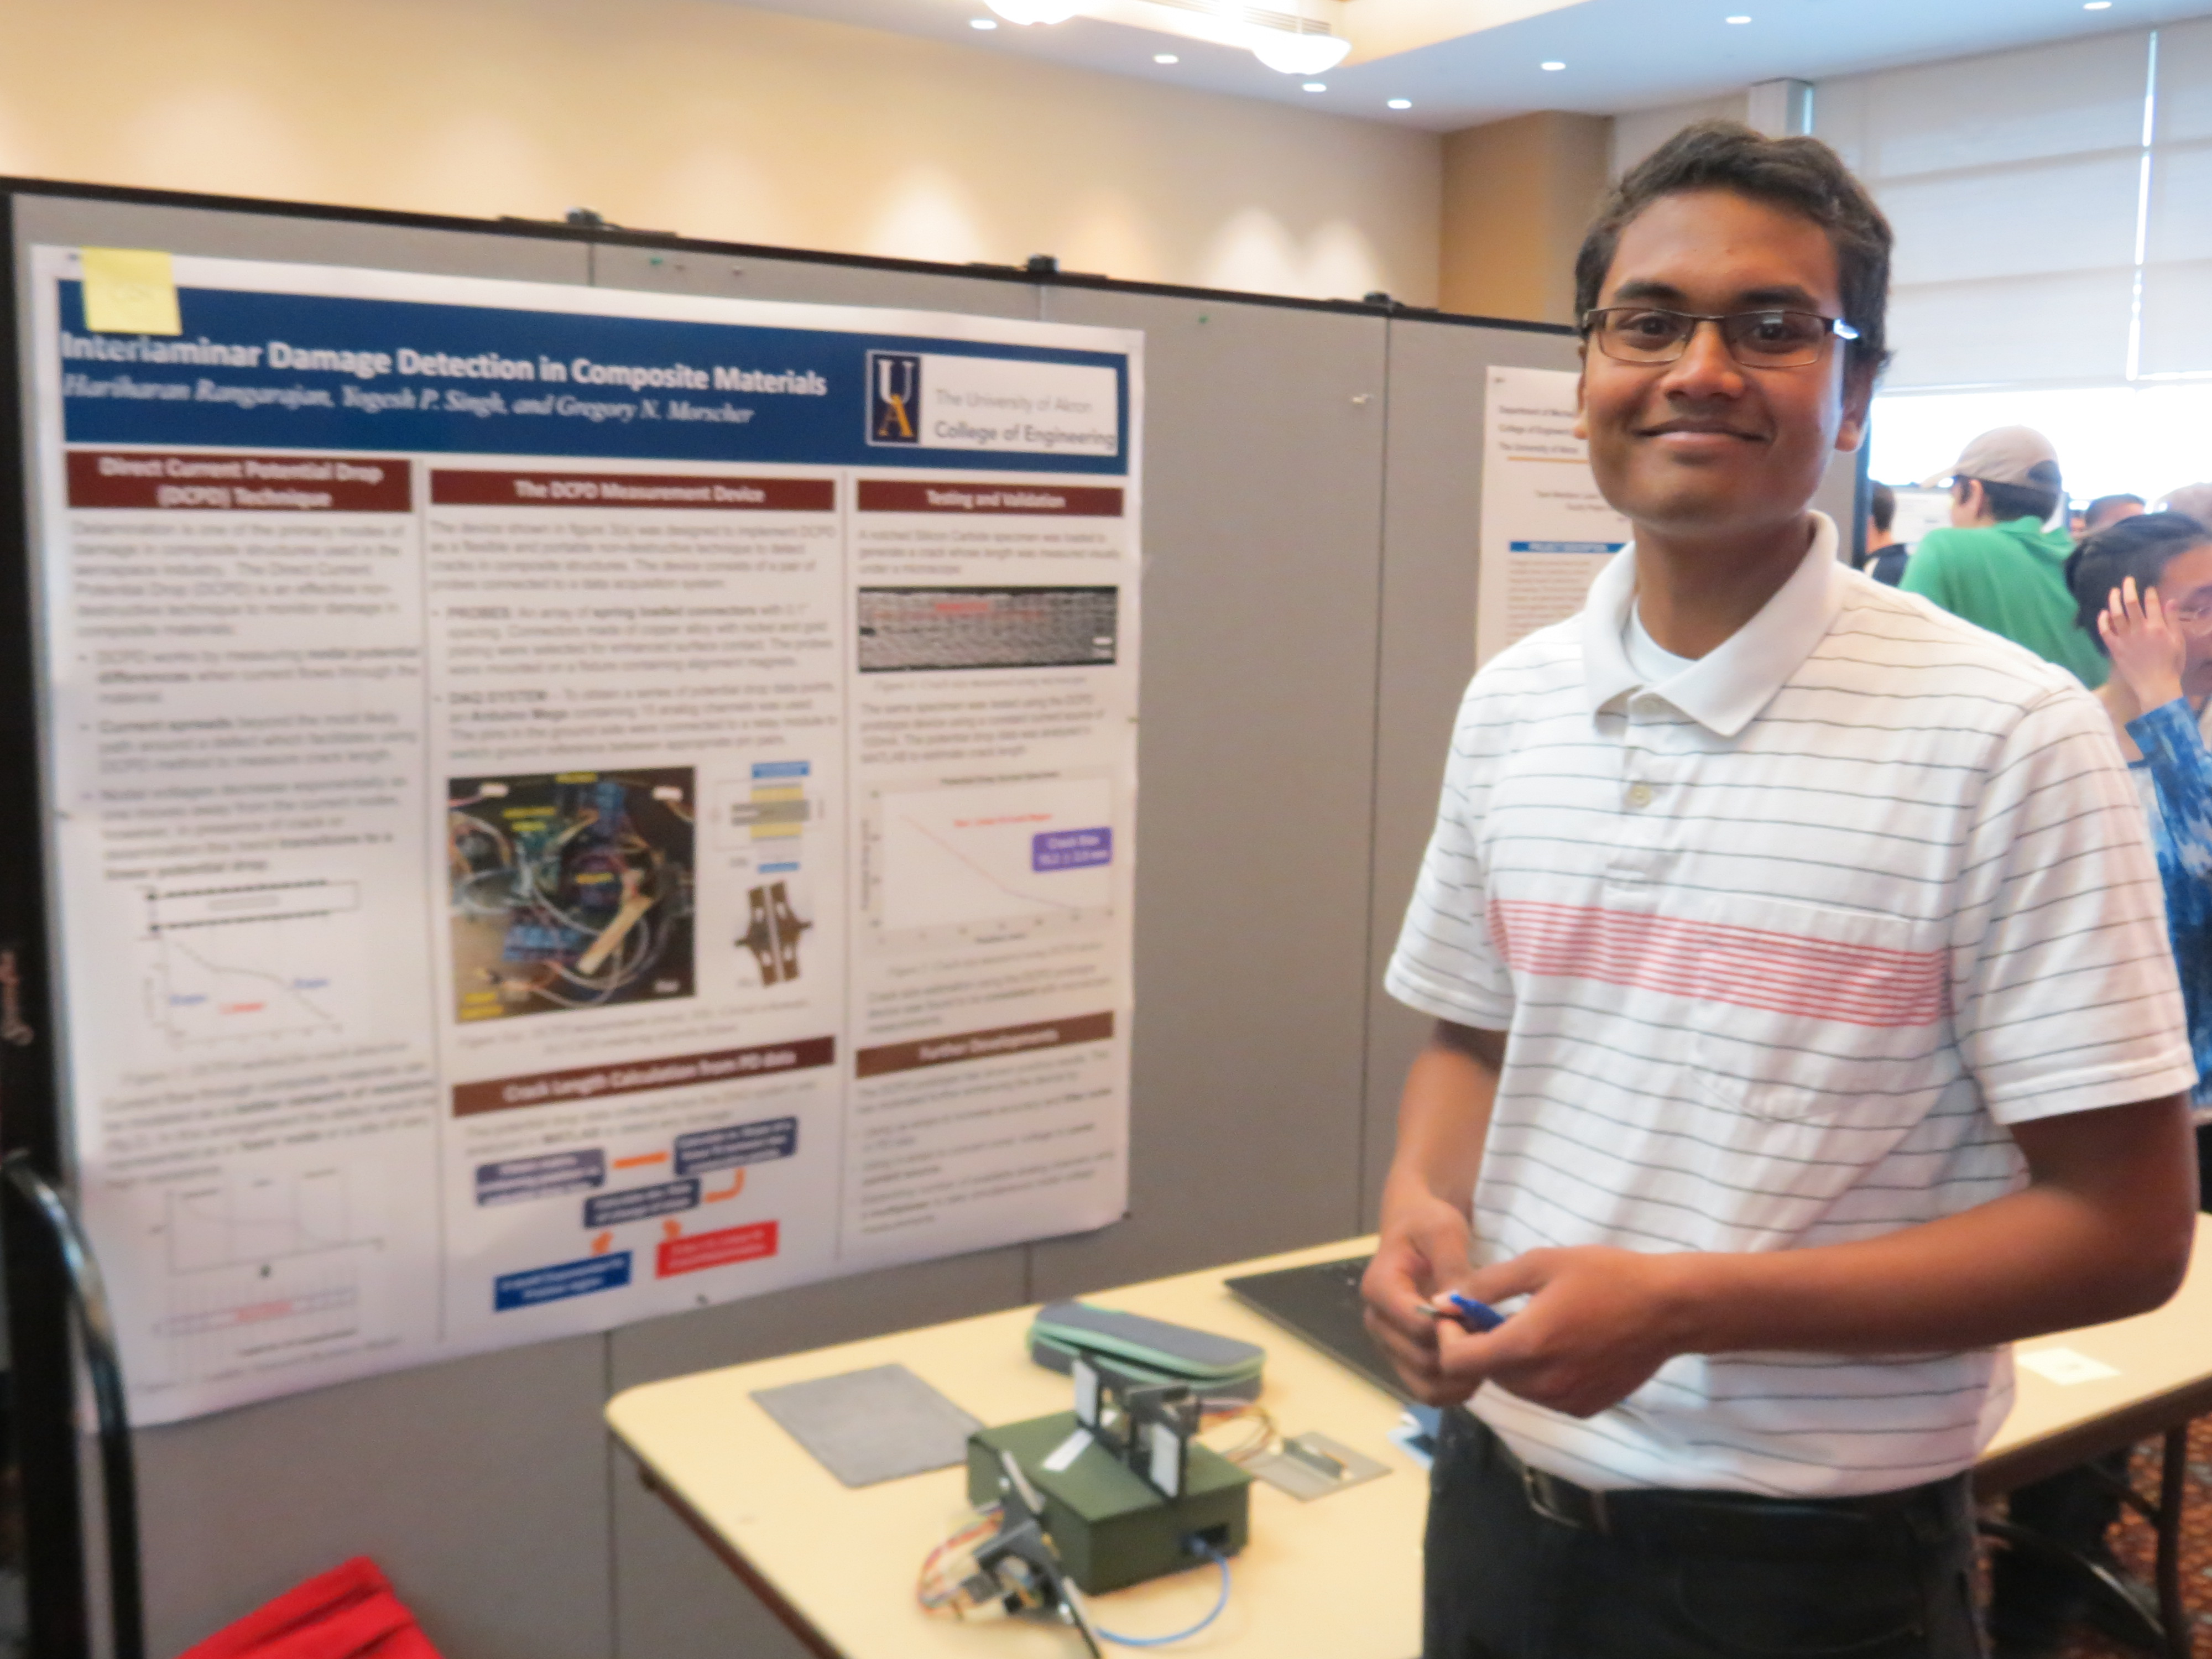 Engr_SeniorDesignDay_Project_C04_1st_Prize_Standing_near_Poster_IMG_7511